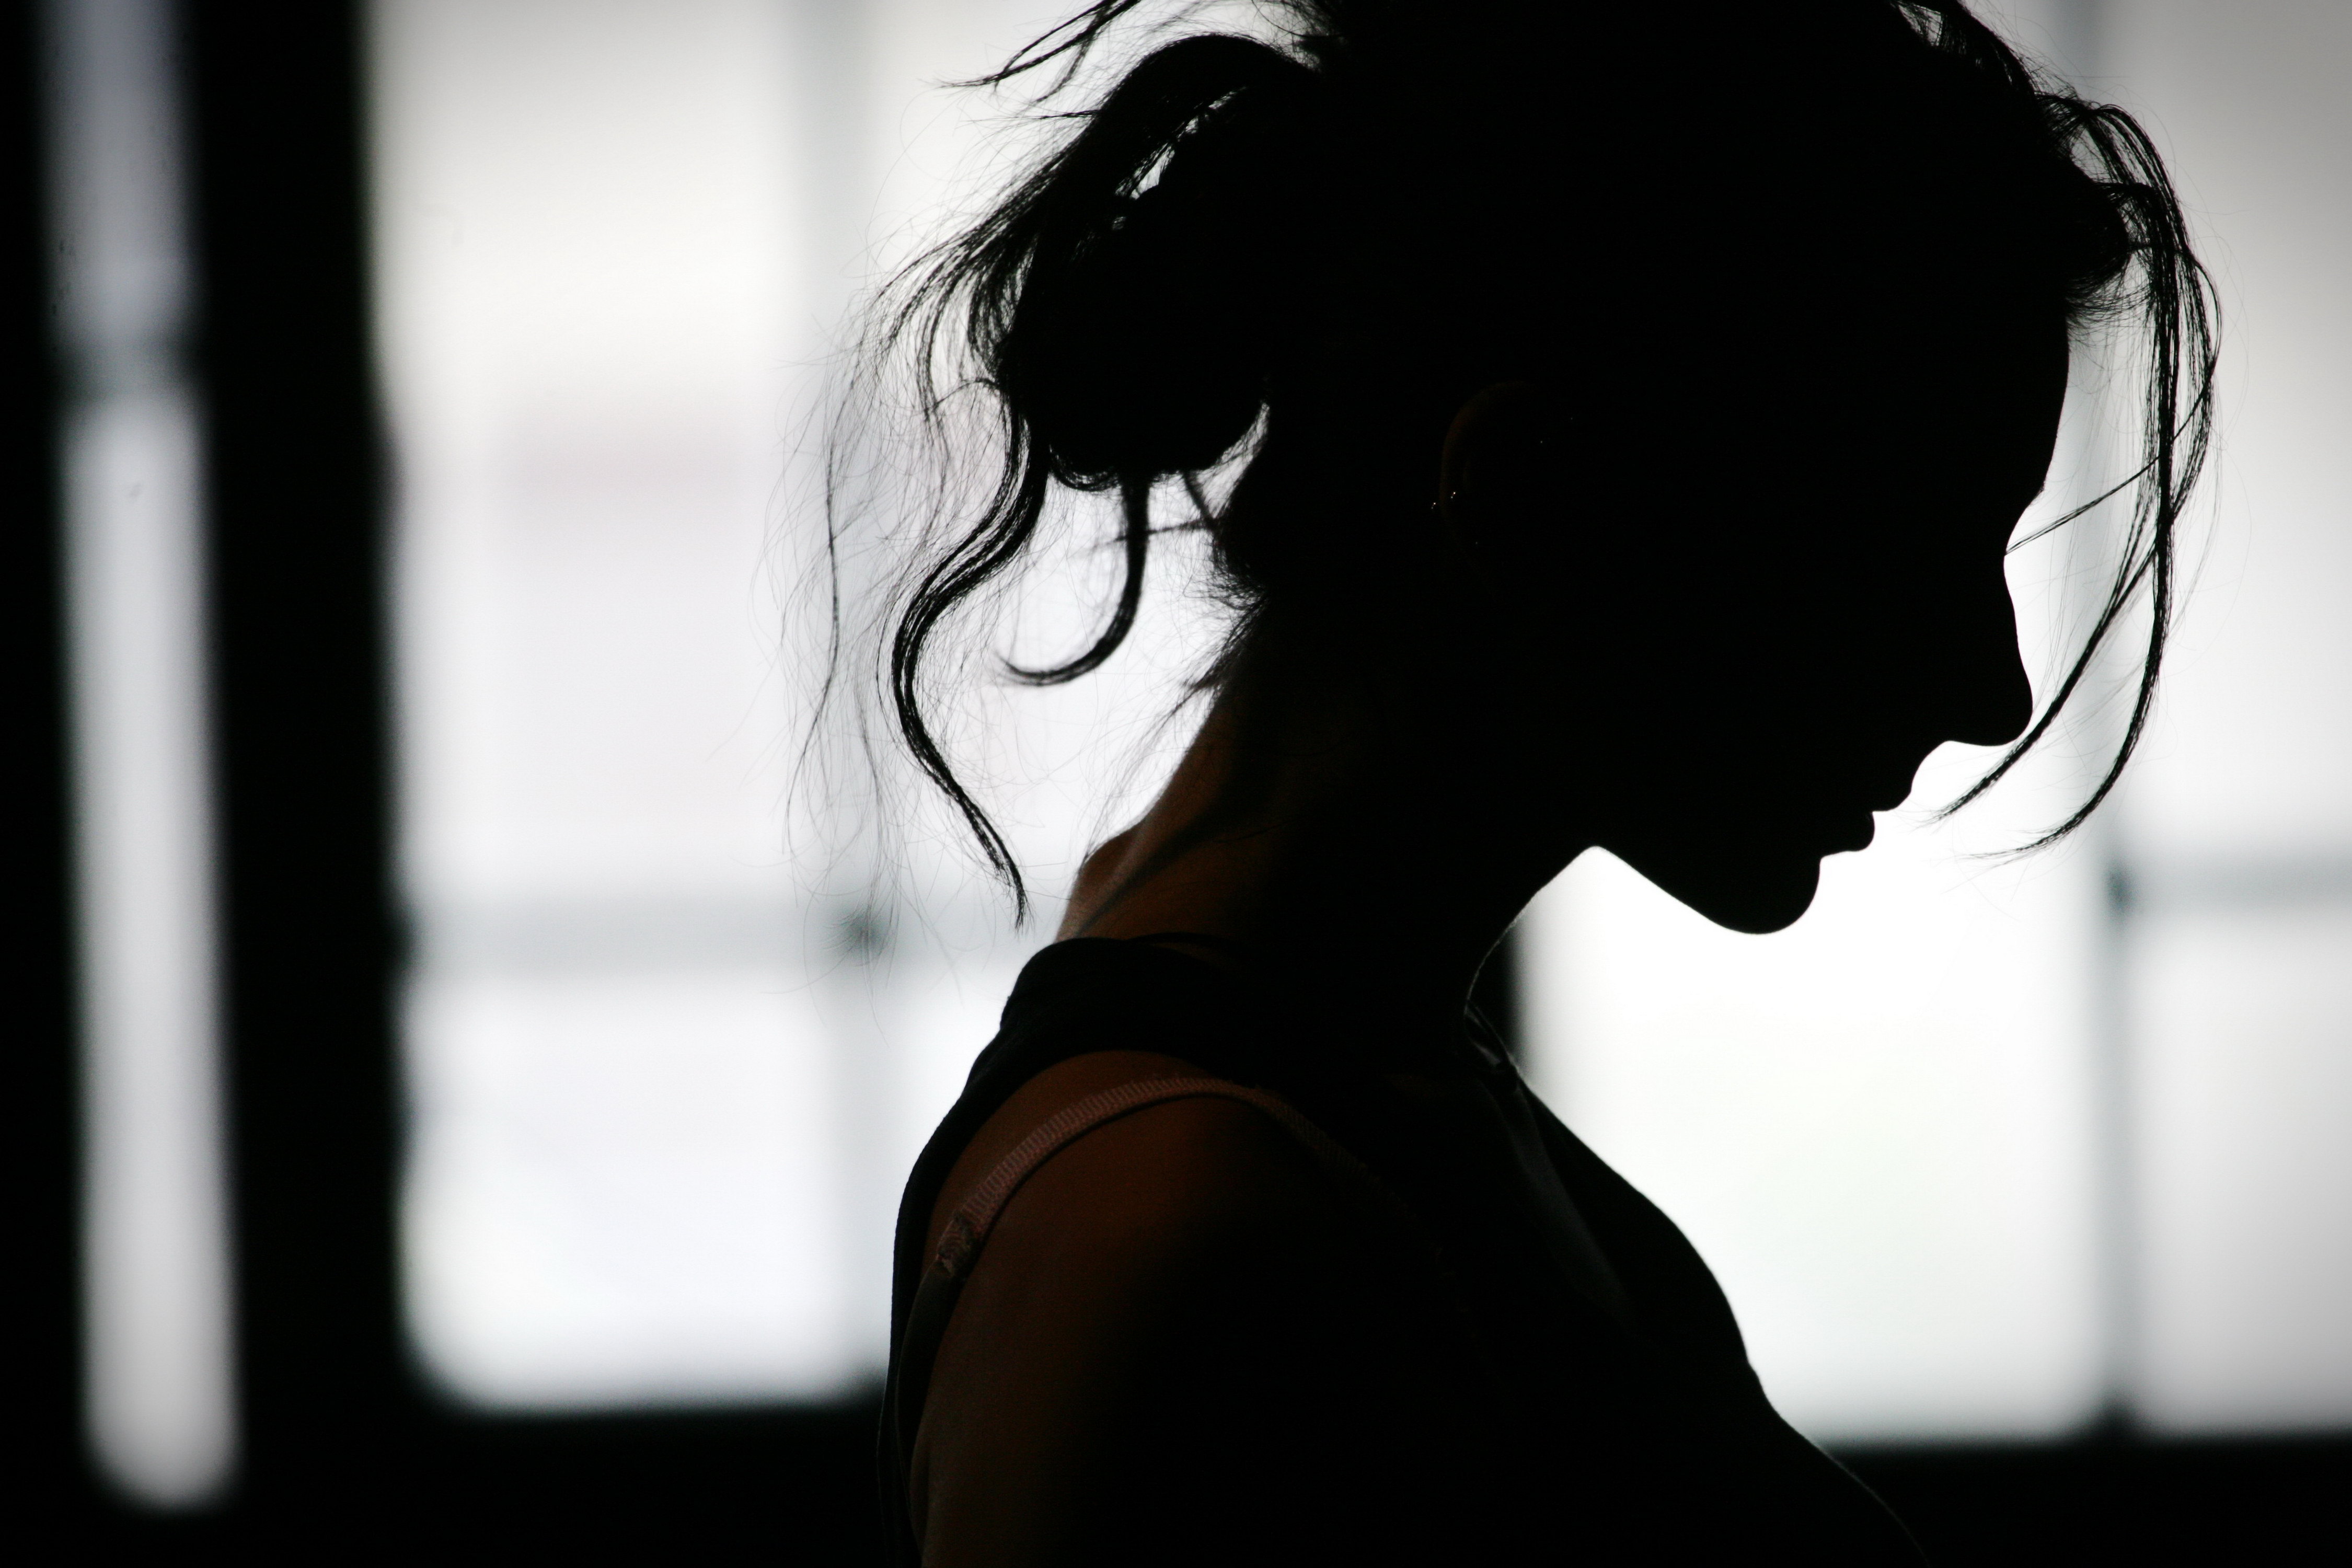 Silhouette of a woman | Source: Shutterstock